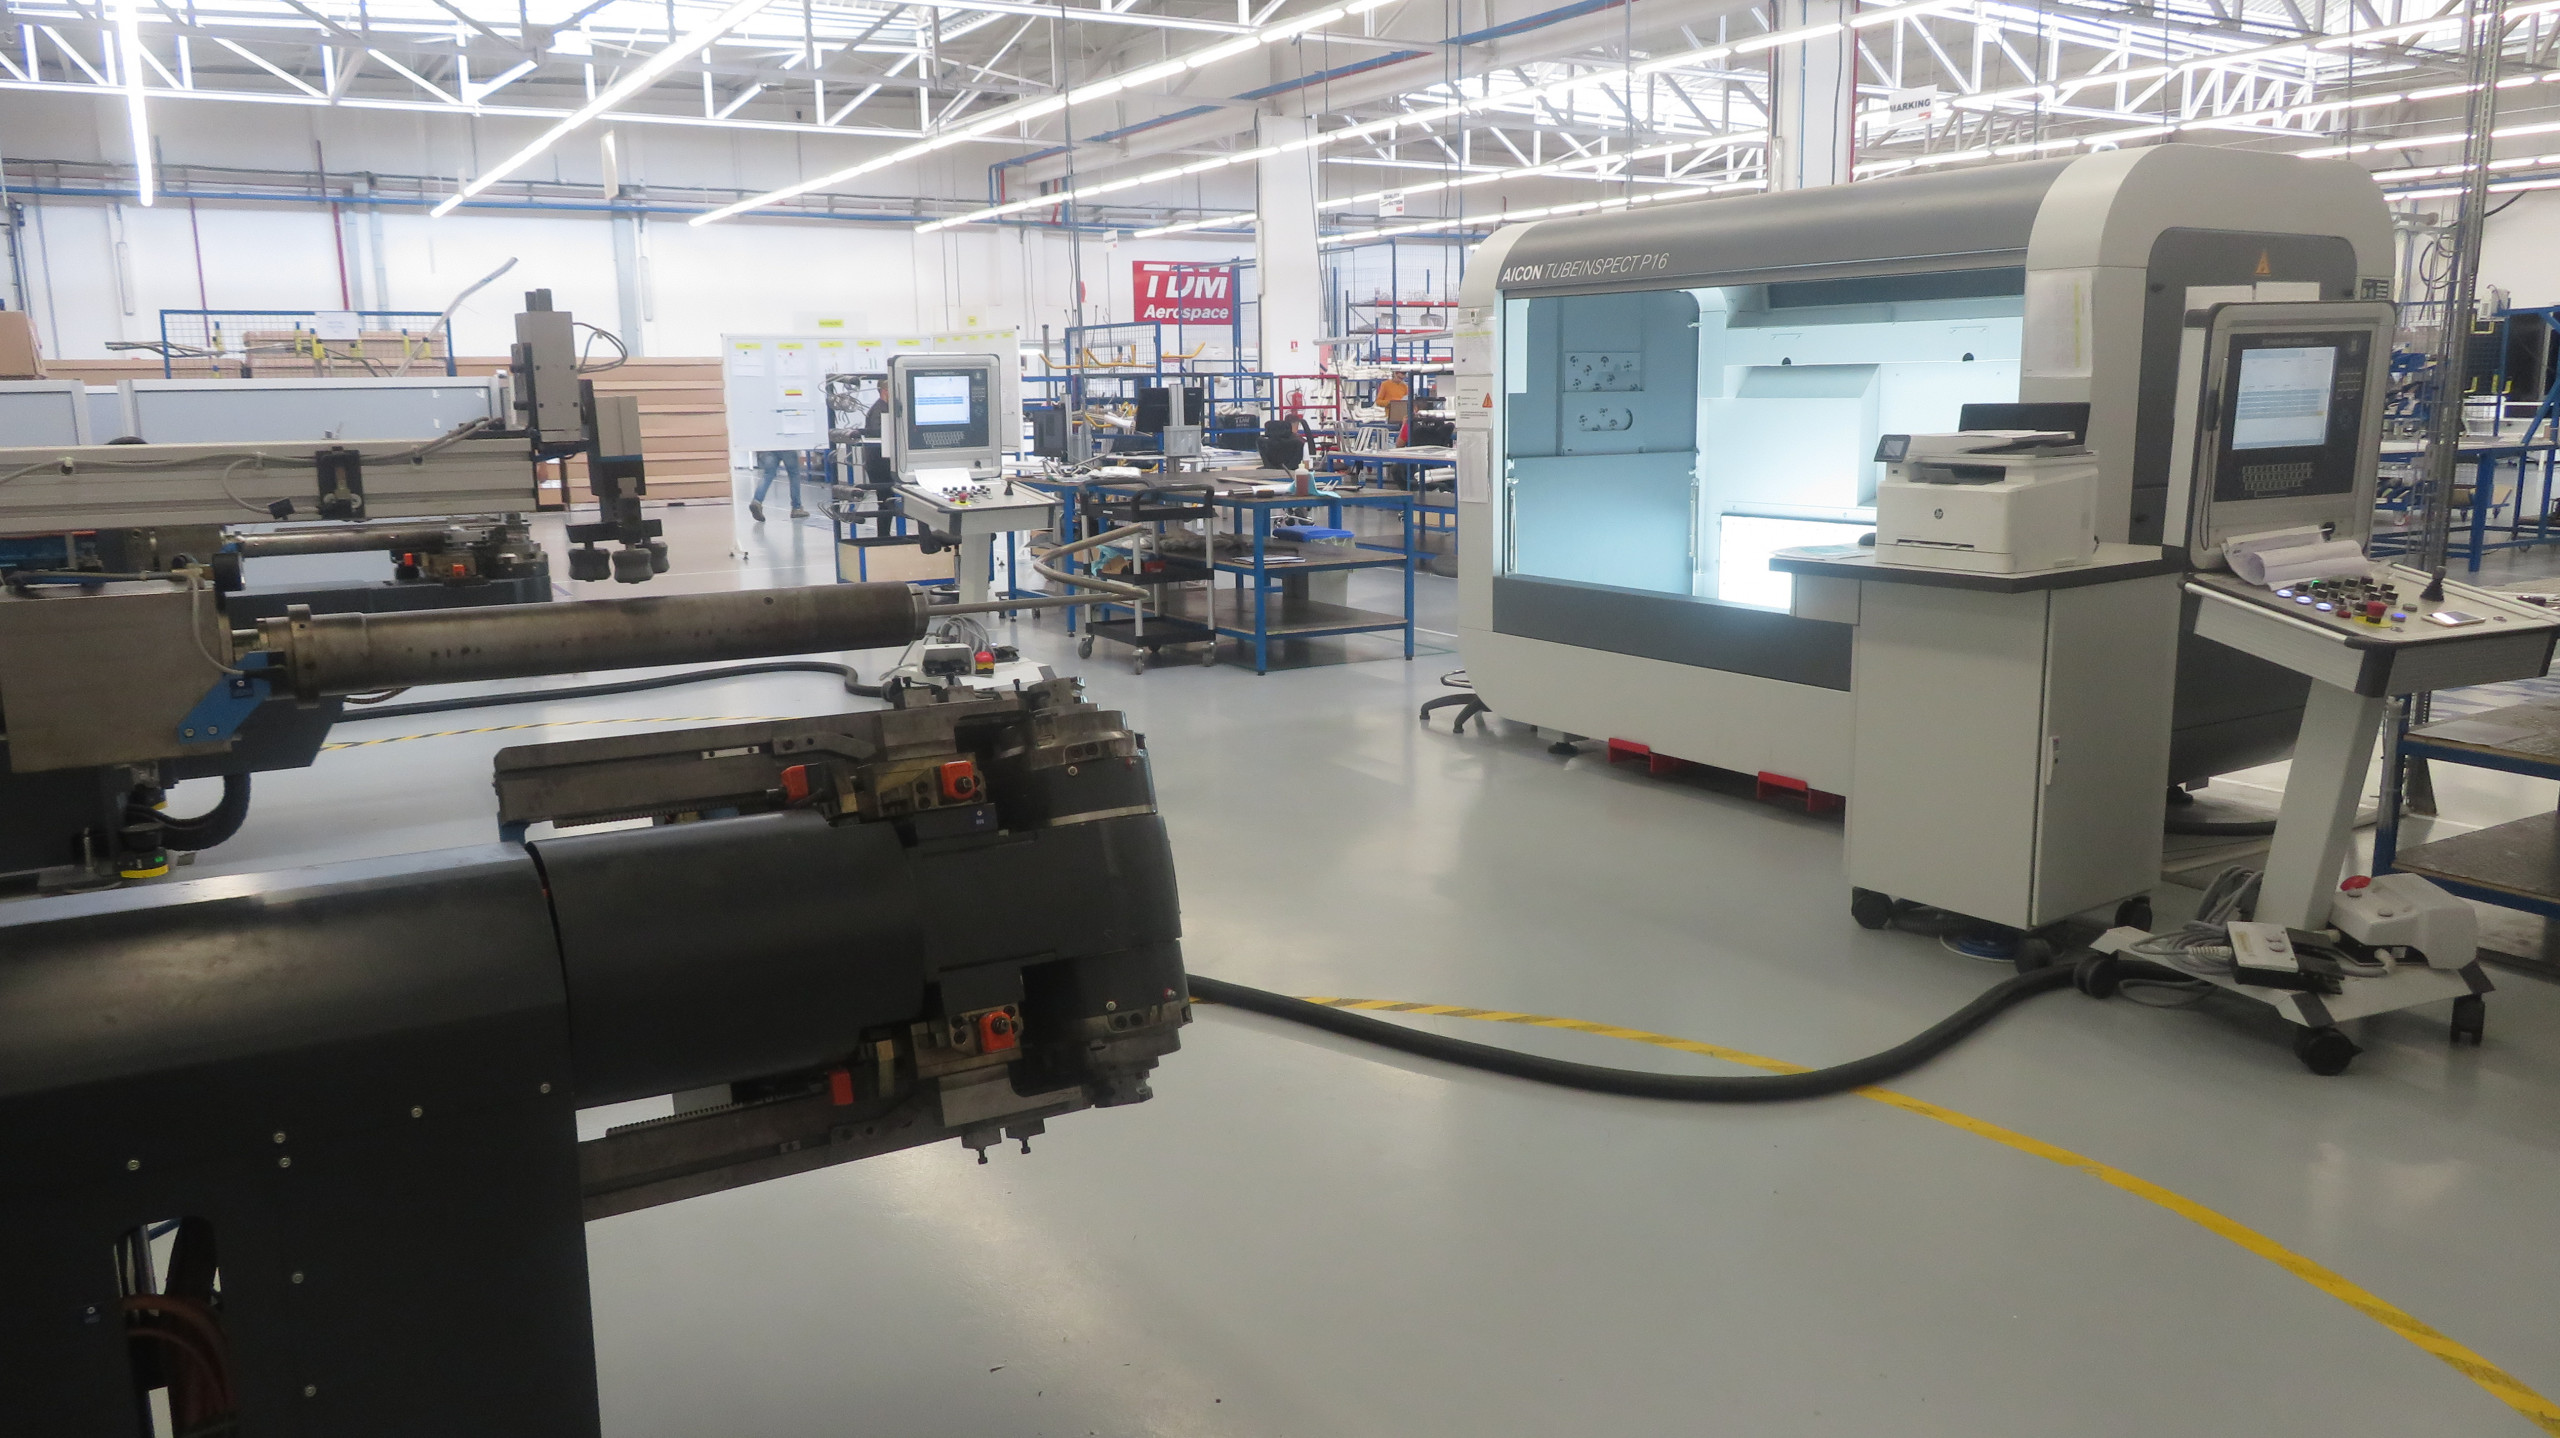 In addition to the two tube bending machines, Schwarze-Robitec supplied a photometric measuring cell with which the tube geometries, lengths between the bends, bending angles and other important parameters can be determined. © TDM Aerospace